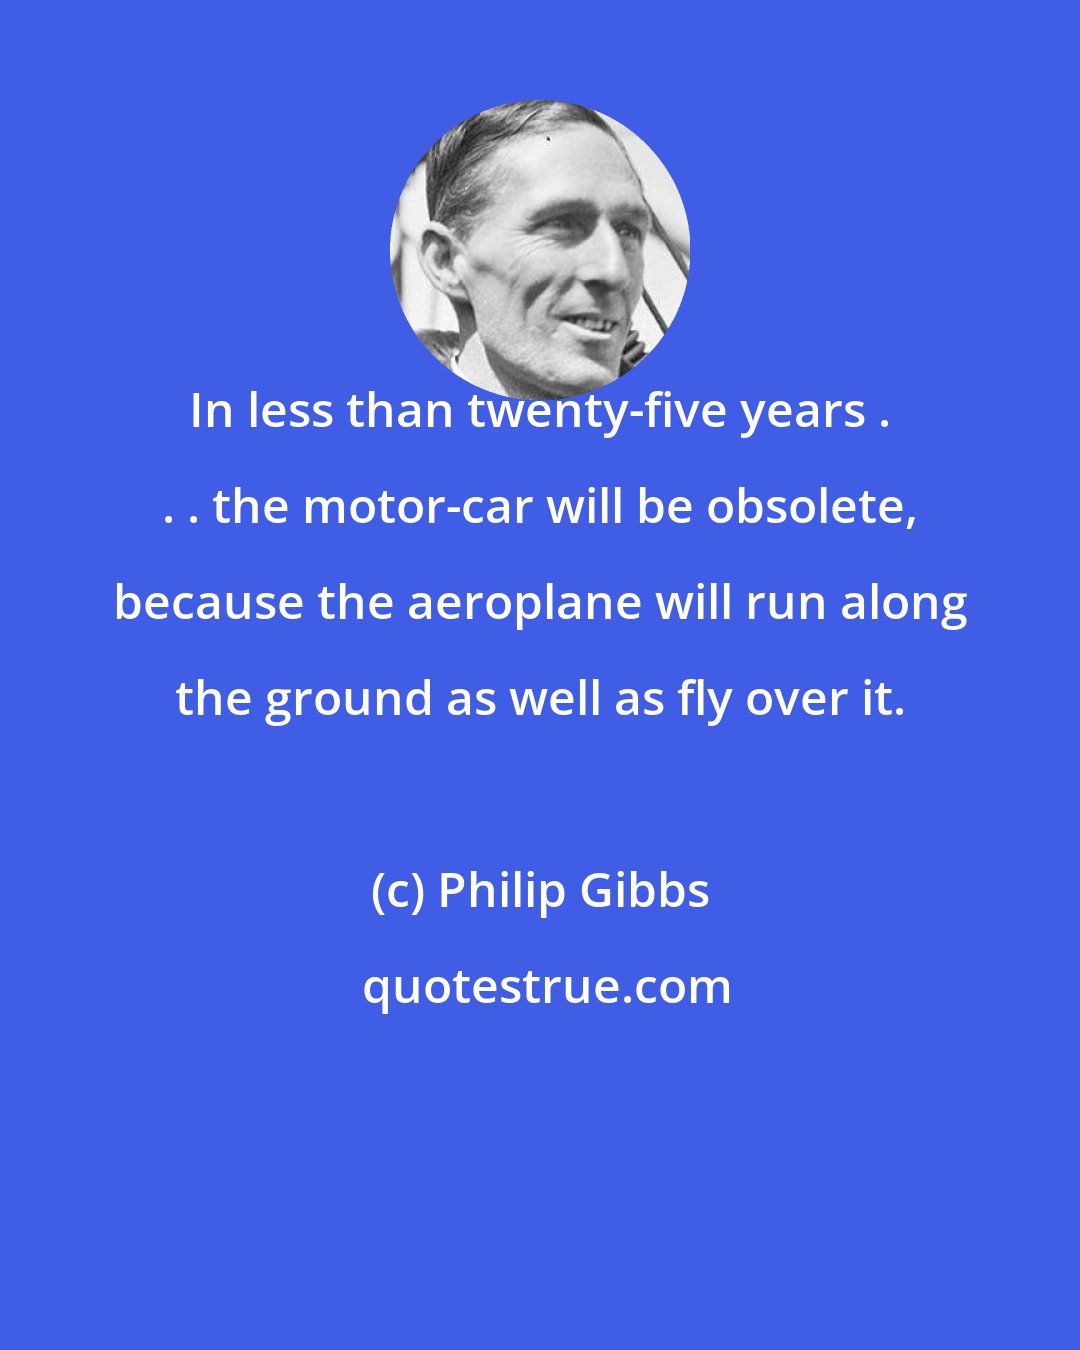 Philip Gibbs: In less than twenty-five years . . . the motor-car will be obsolete, because the aeroplane will run along the ground as well as fly over it.